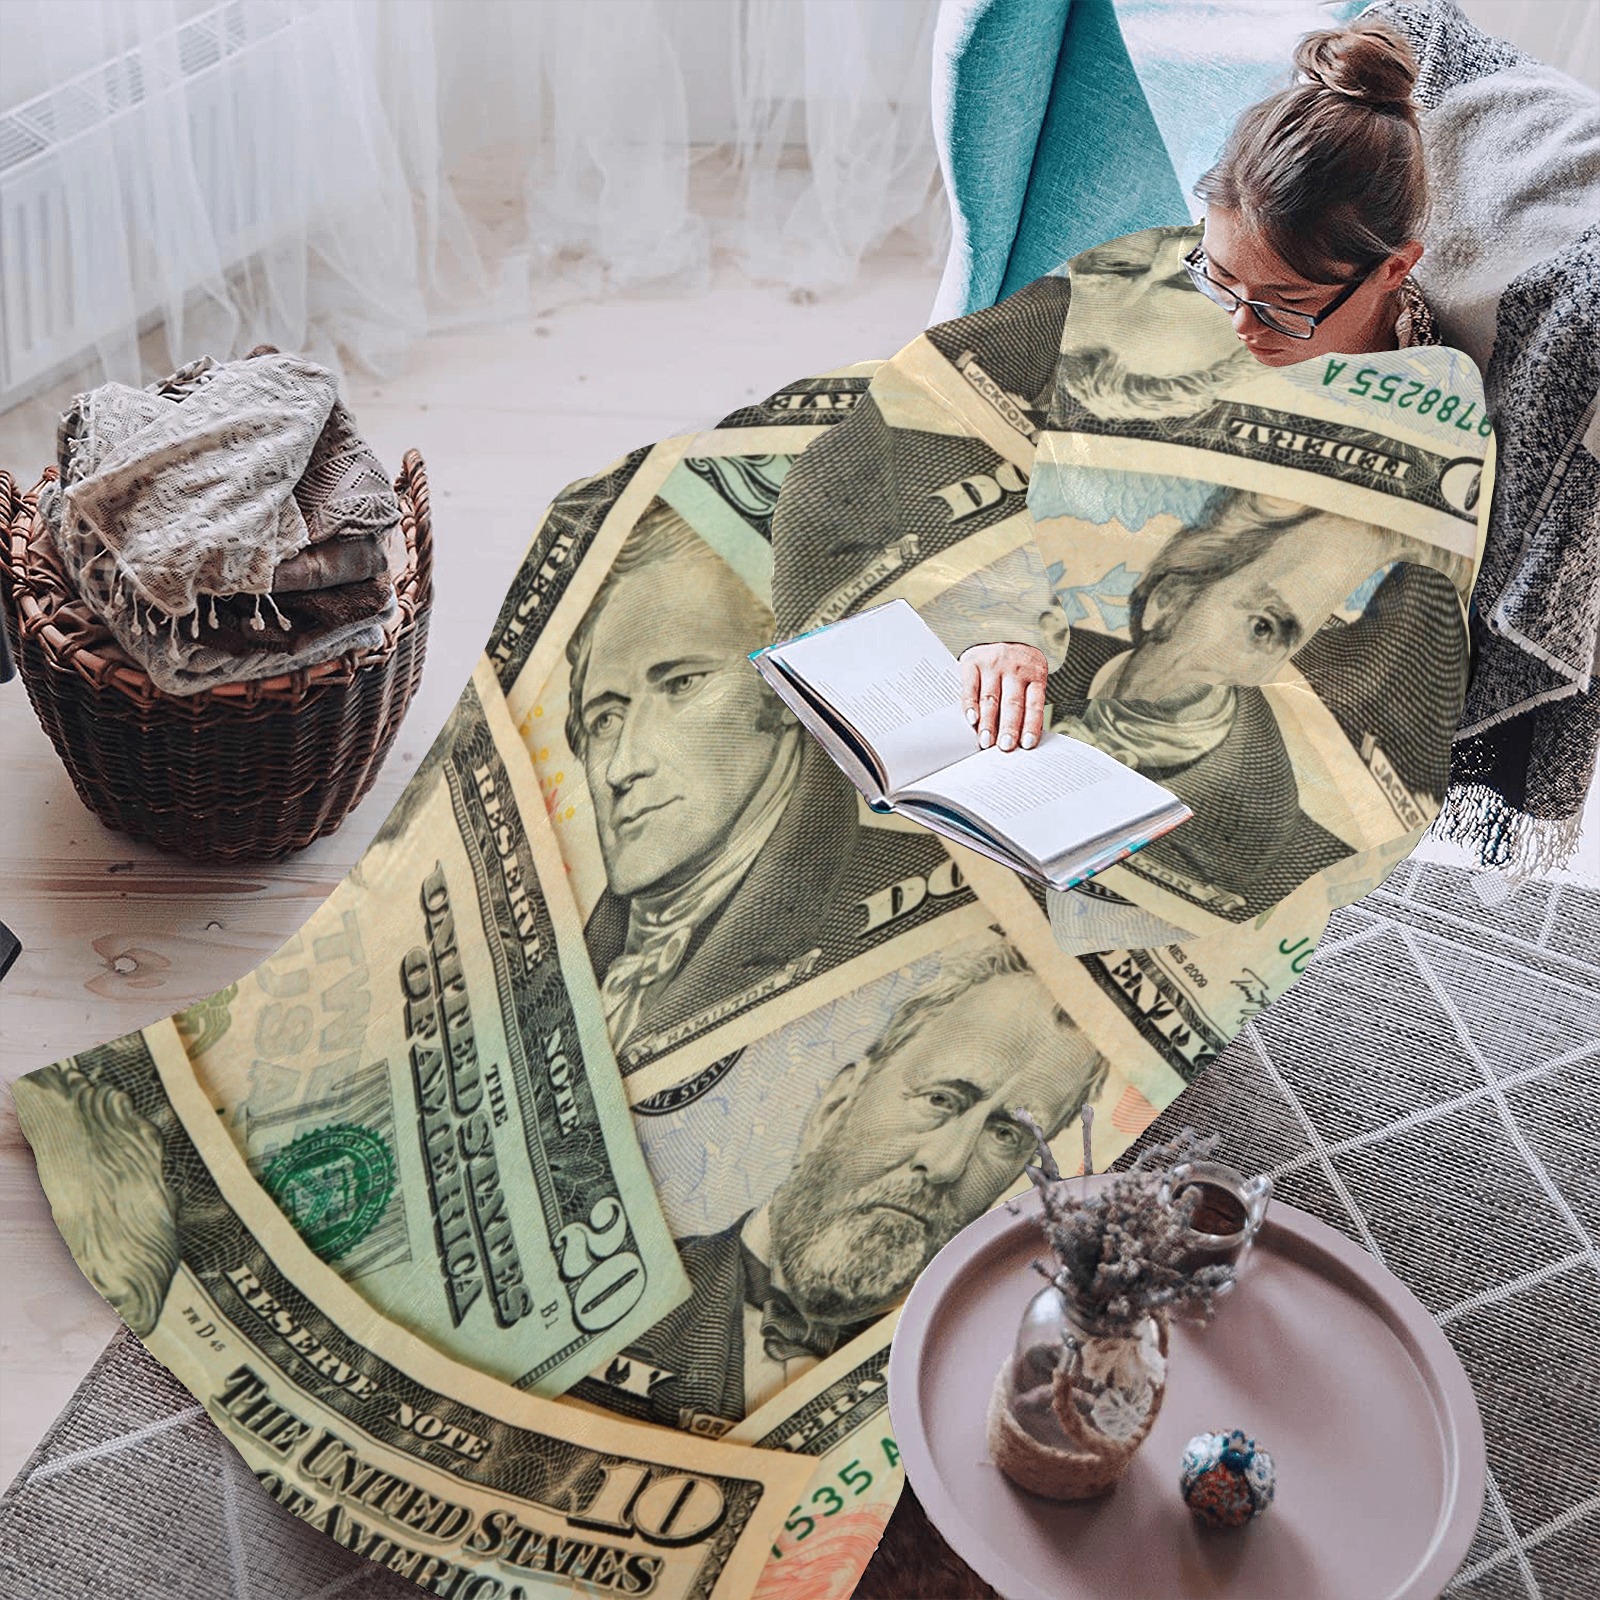 US PAPER CURRENCY Blanket Robe with Sleeves for Adults